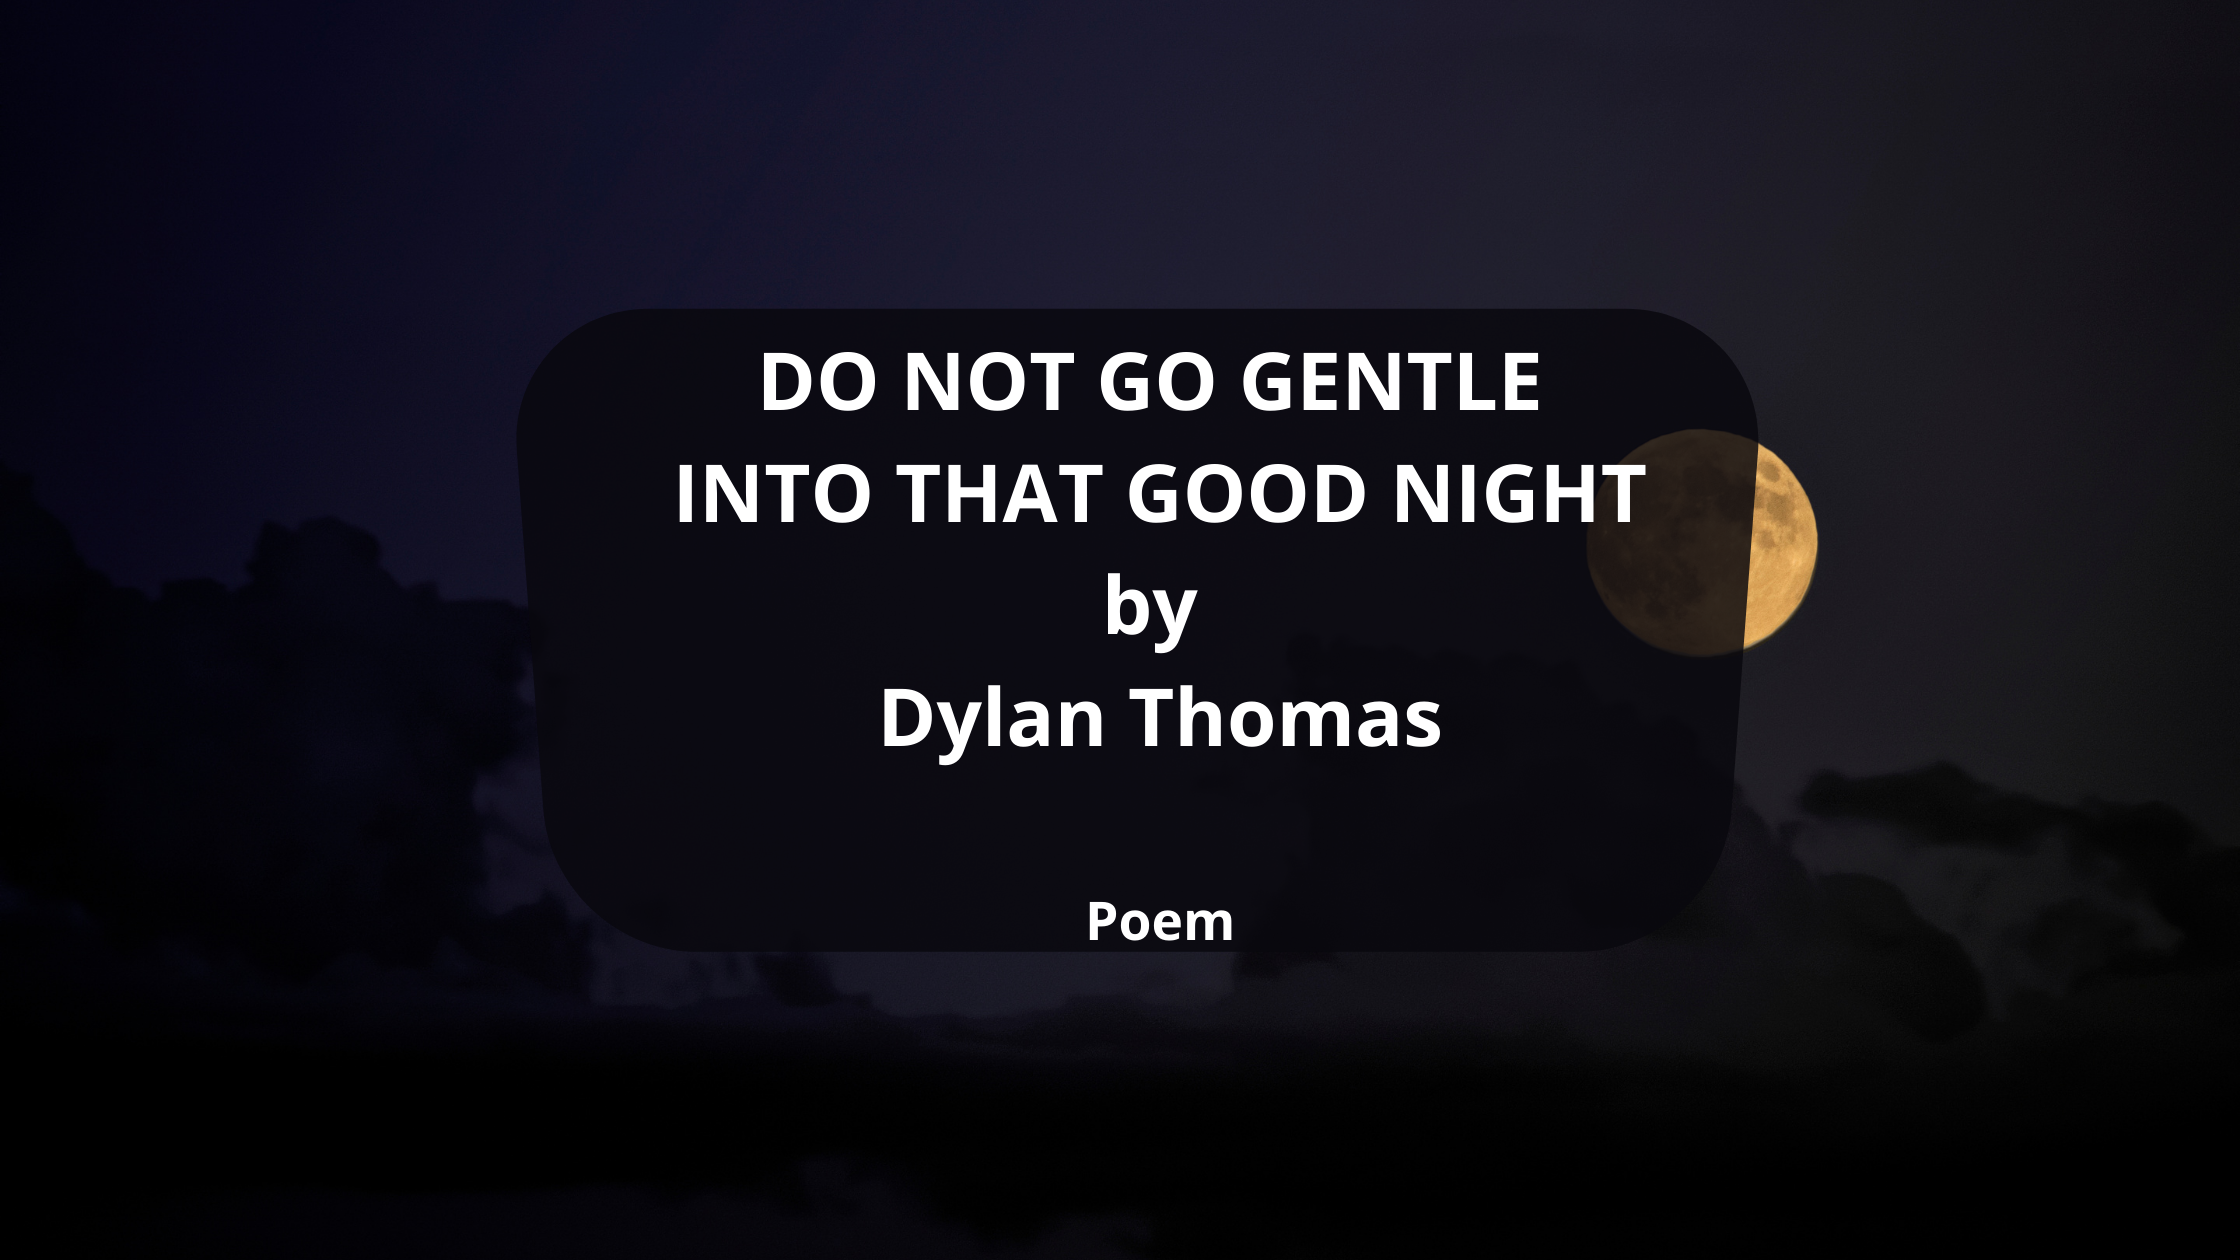 DO NOT GO GENTLE INTO THAT GOOD NIGHT Poem by Dylan Thomas